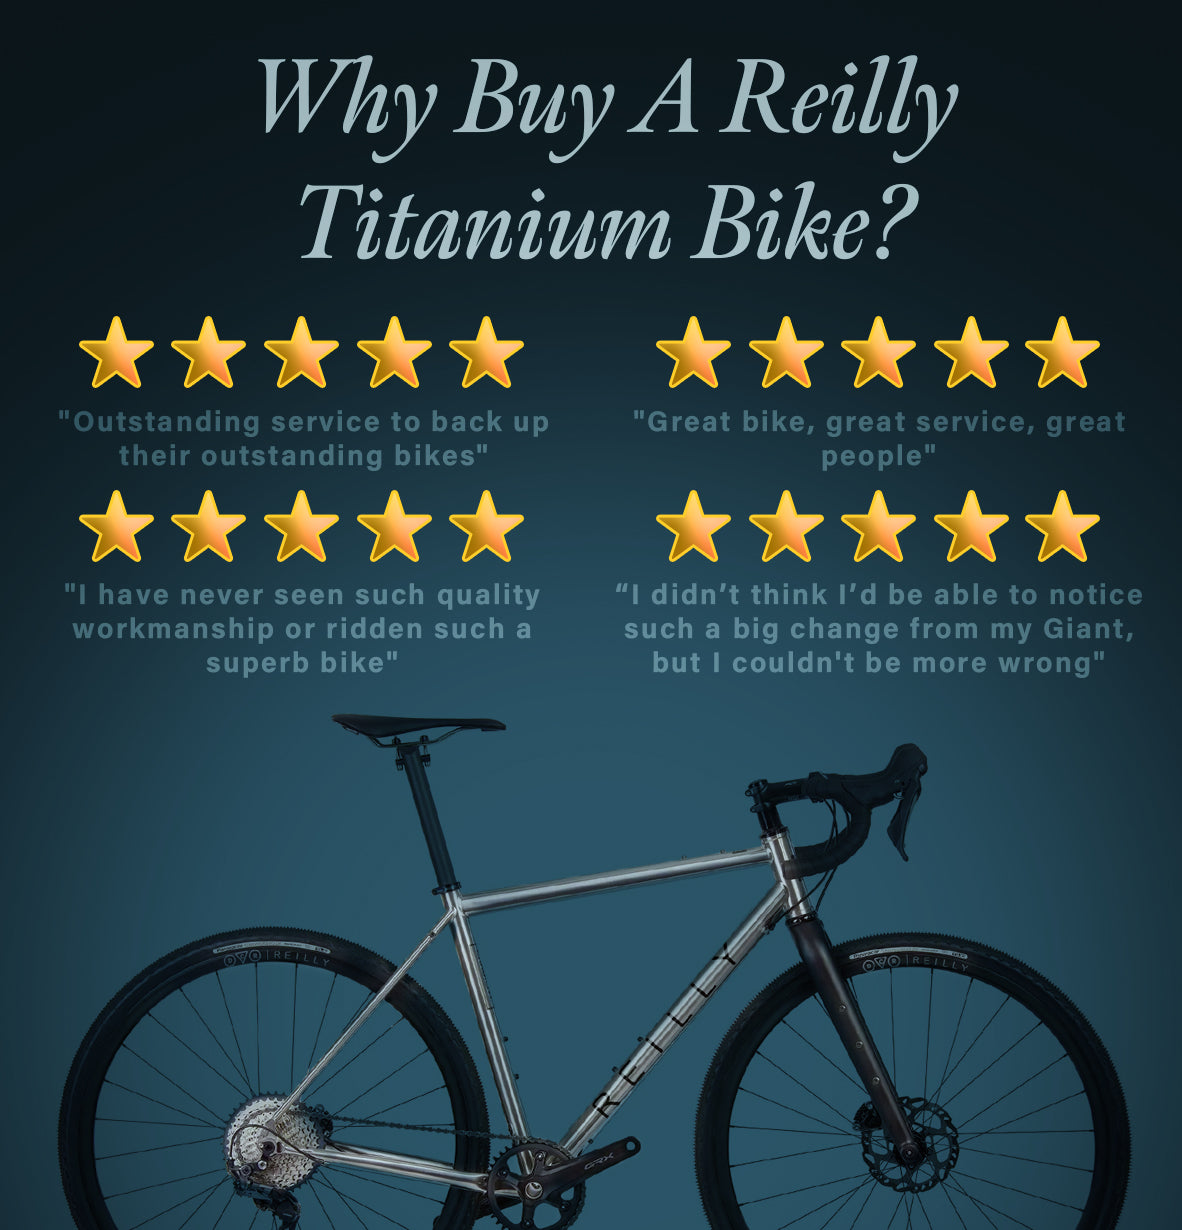 Banner with bike lower half and reviews and star rating in top half